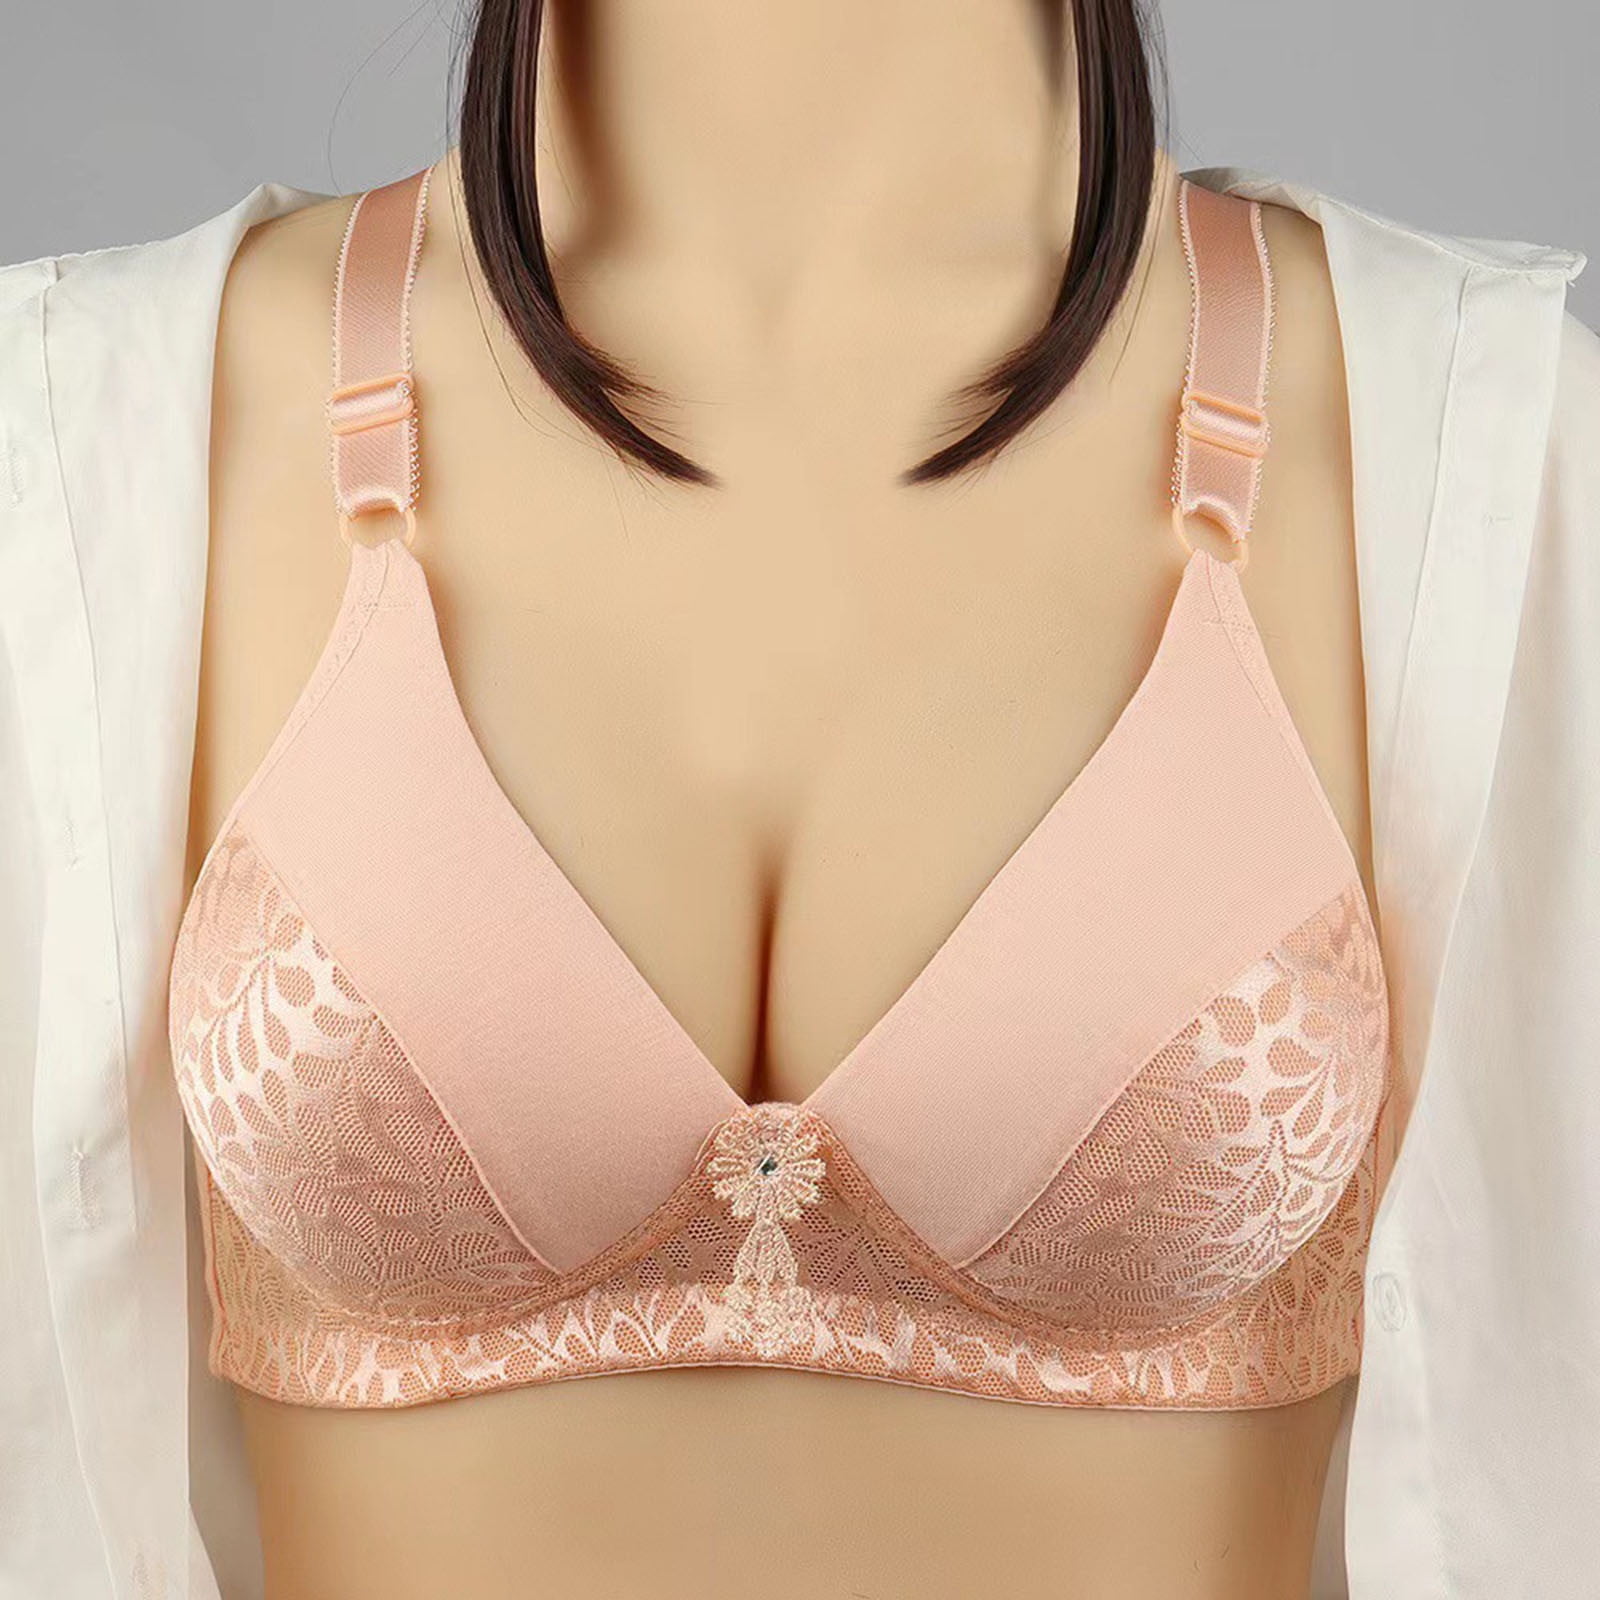 Raeneomay Bras for Women Deals Clearance Woman Ladies Bra Without